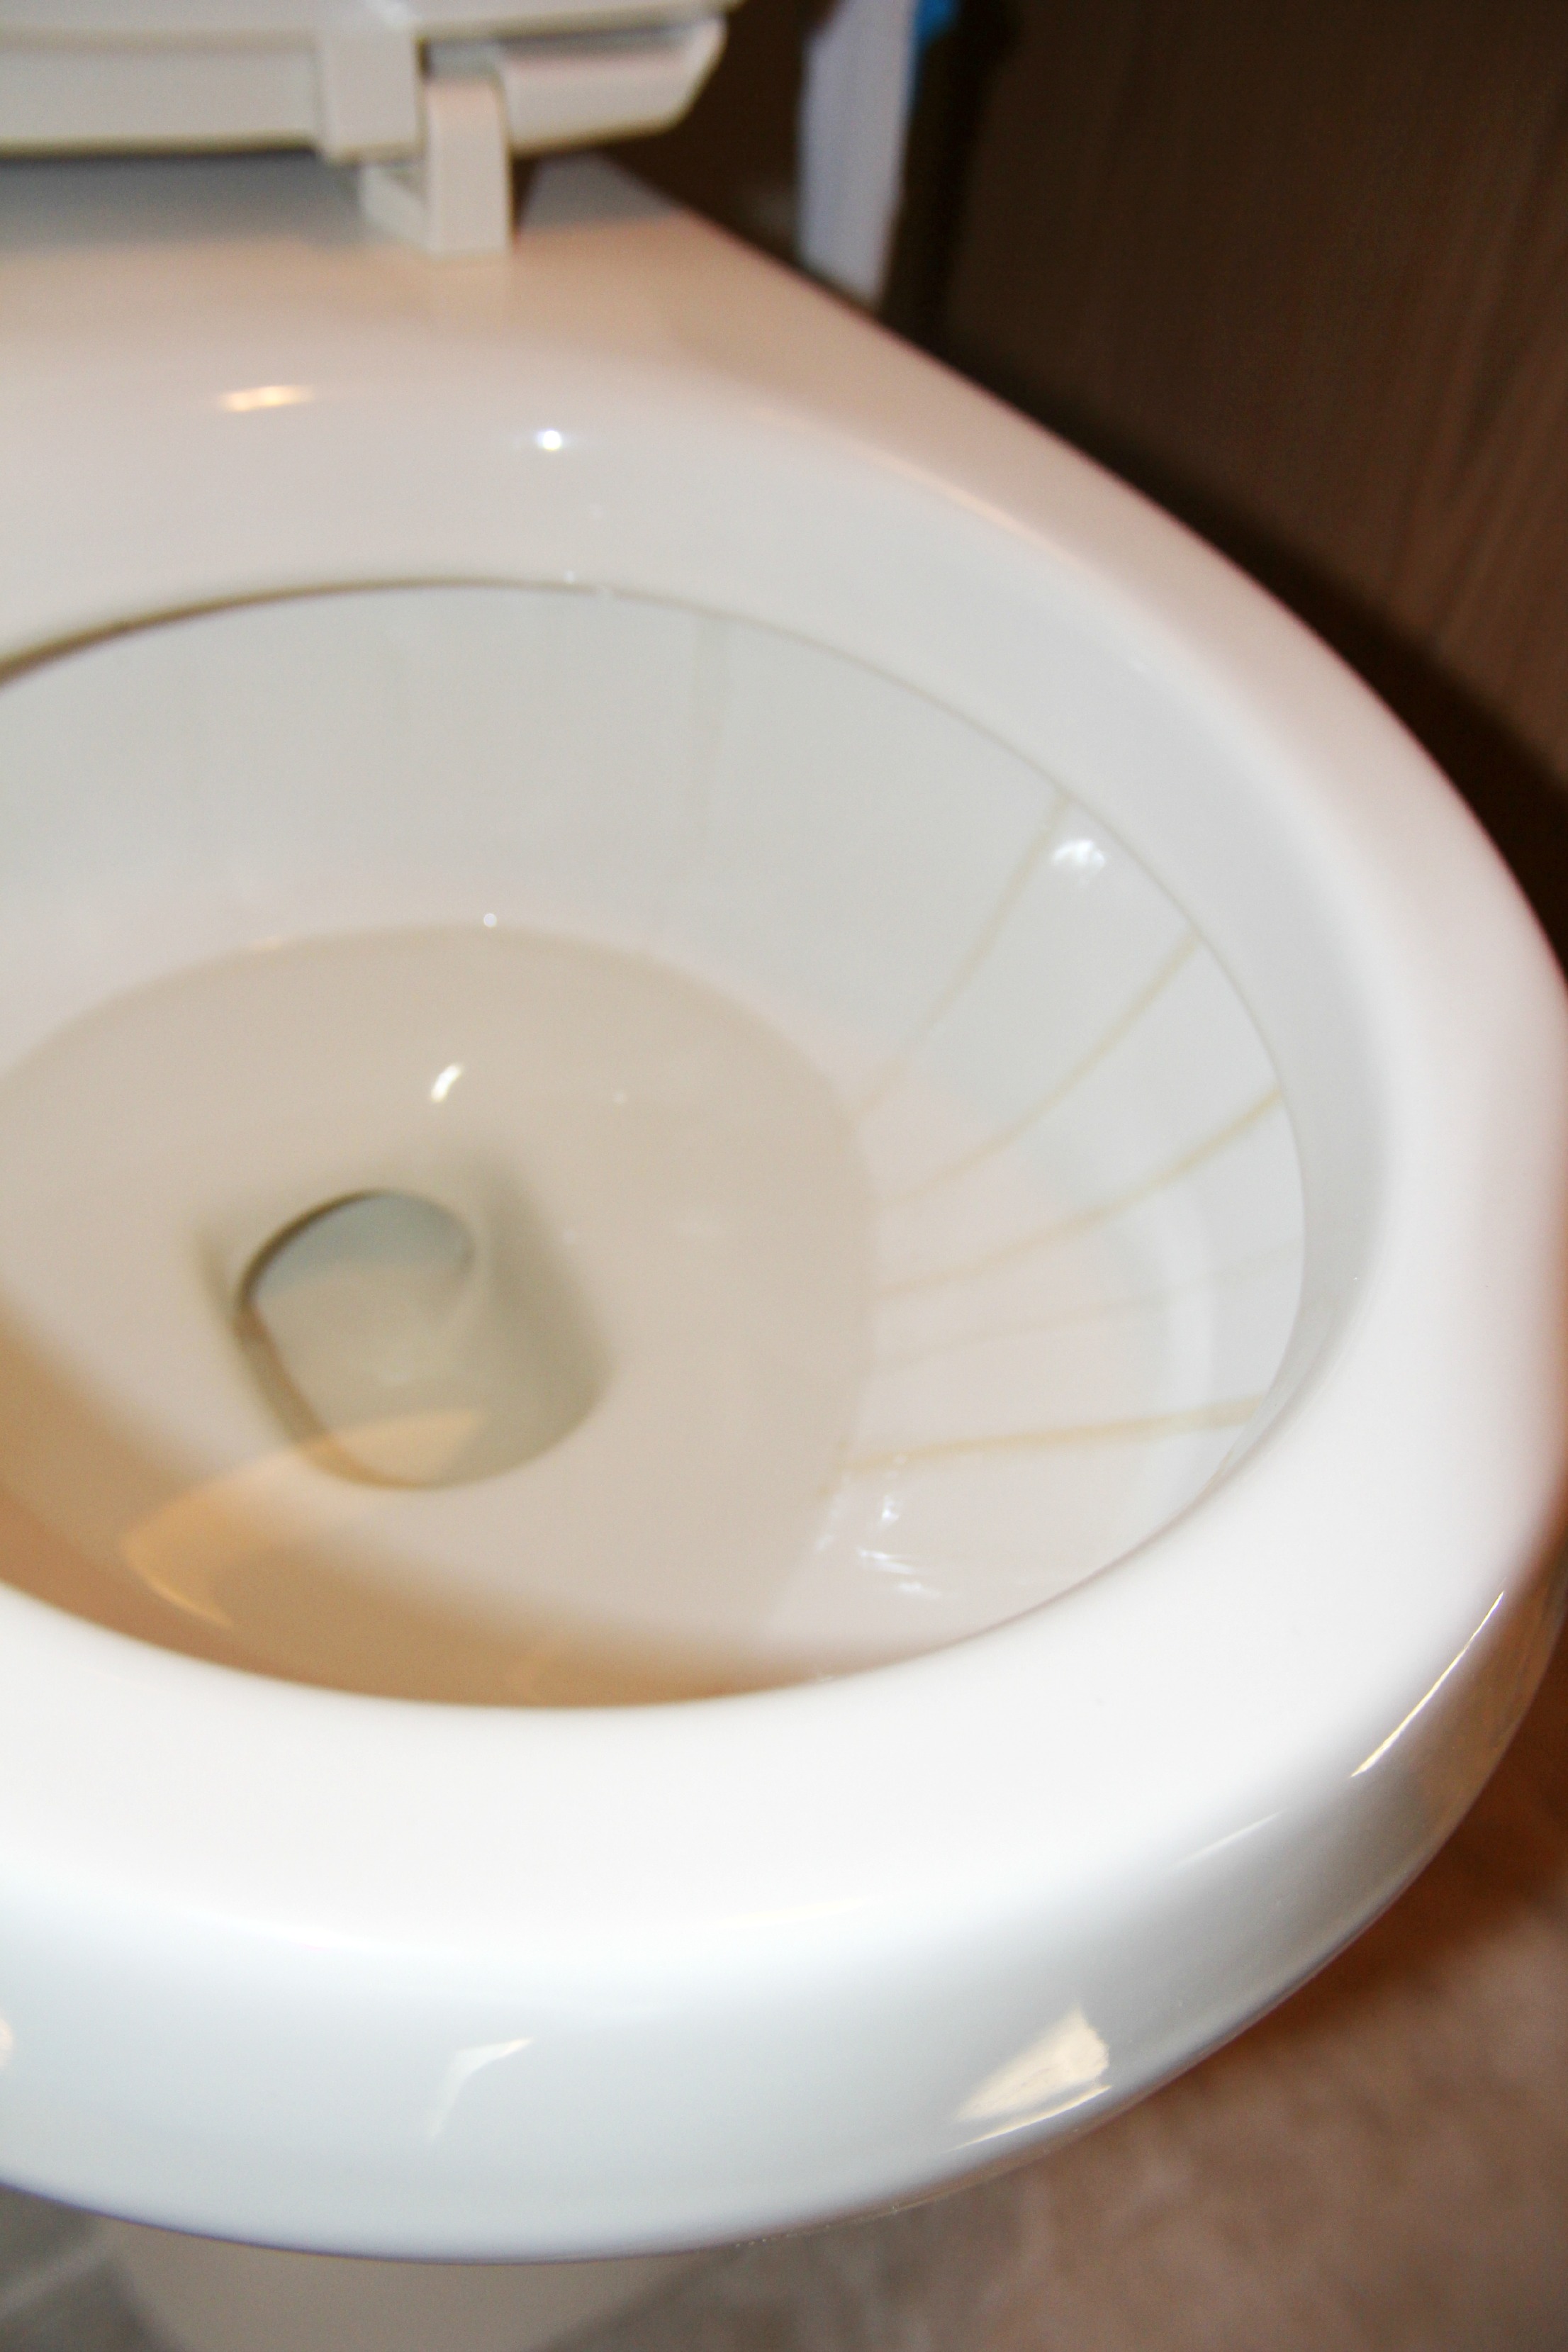 Toilet Hard Water Stains